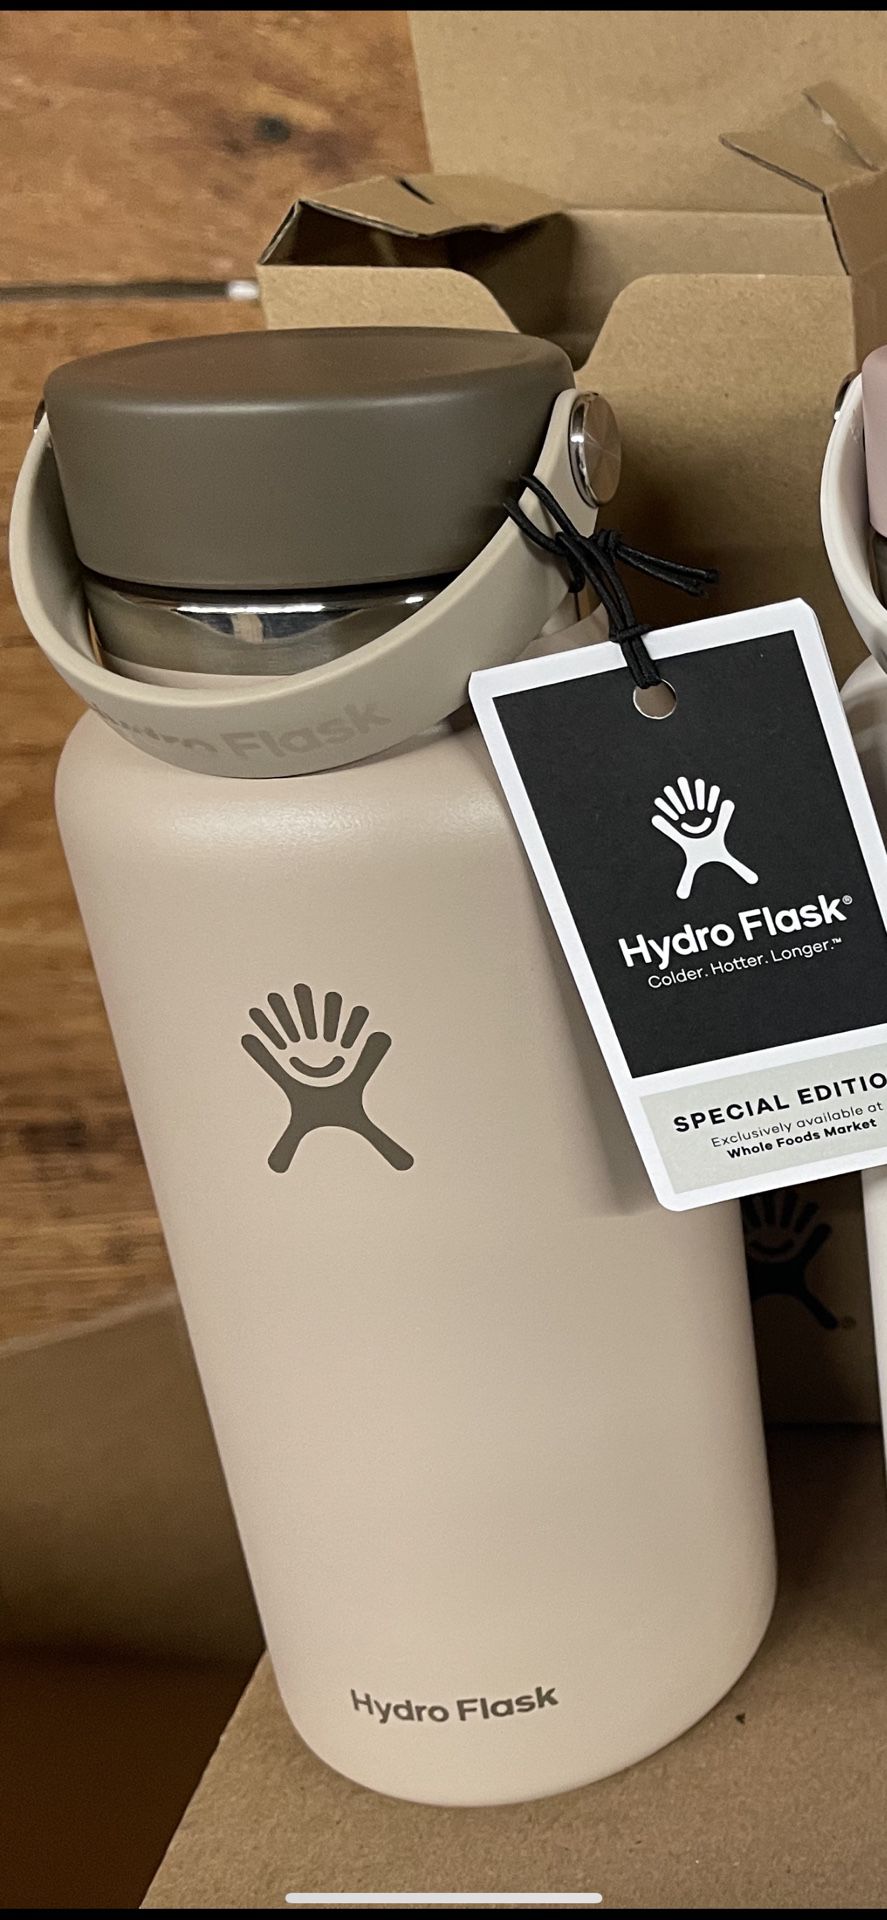 Buy HYDRO FLASK Products at Whole Foods Market